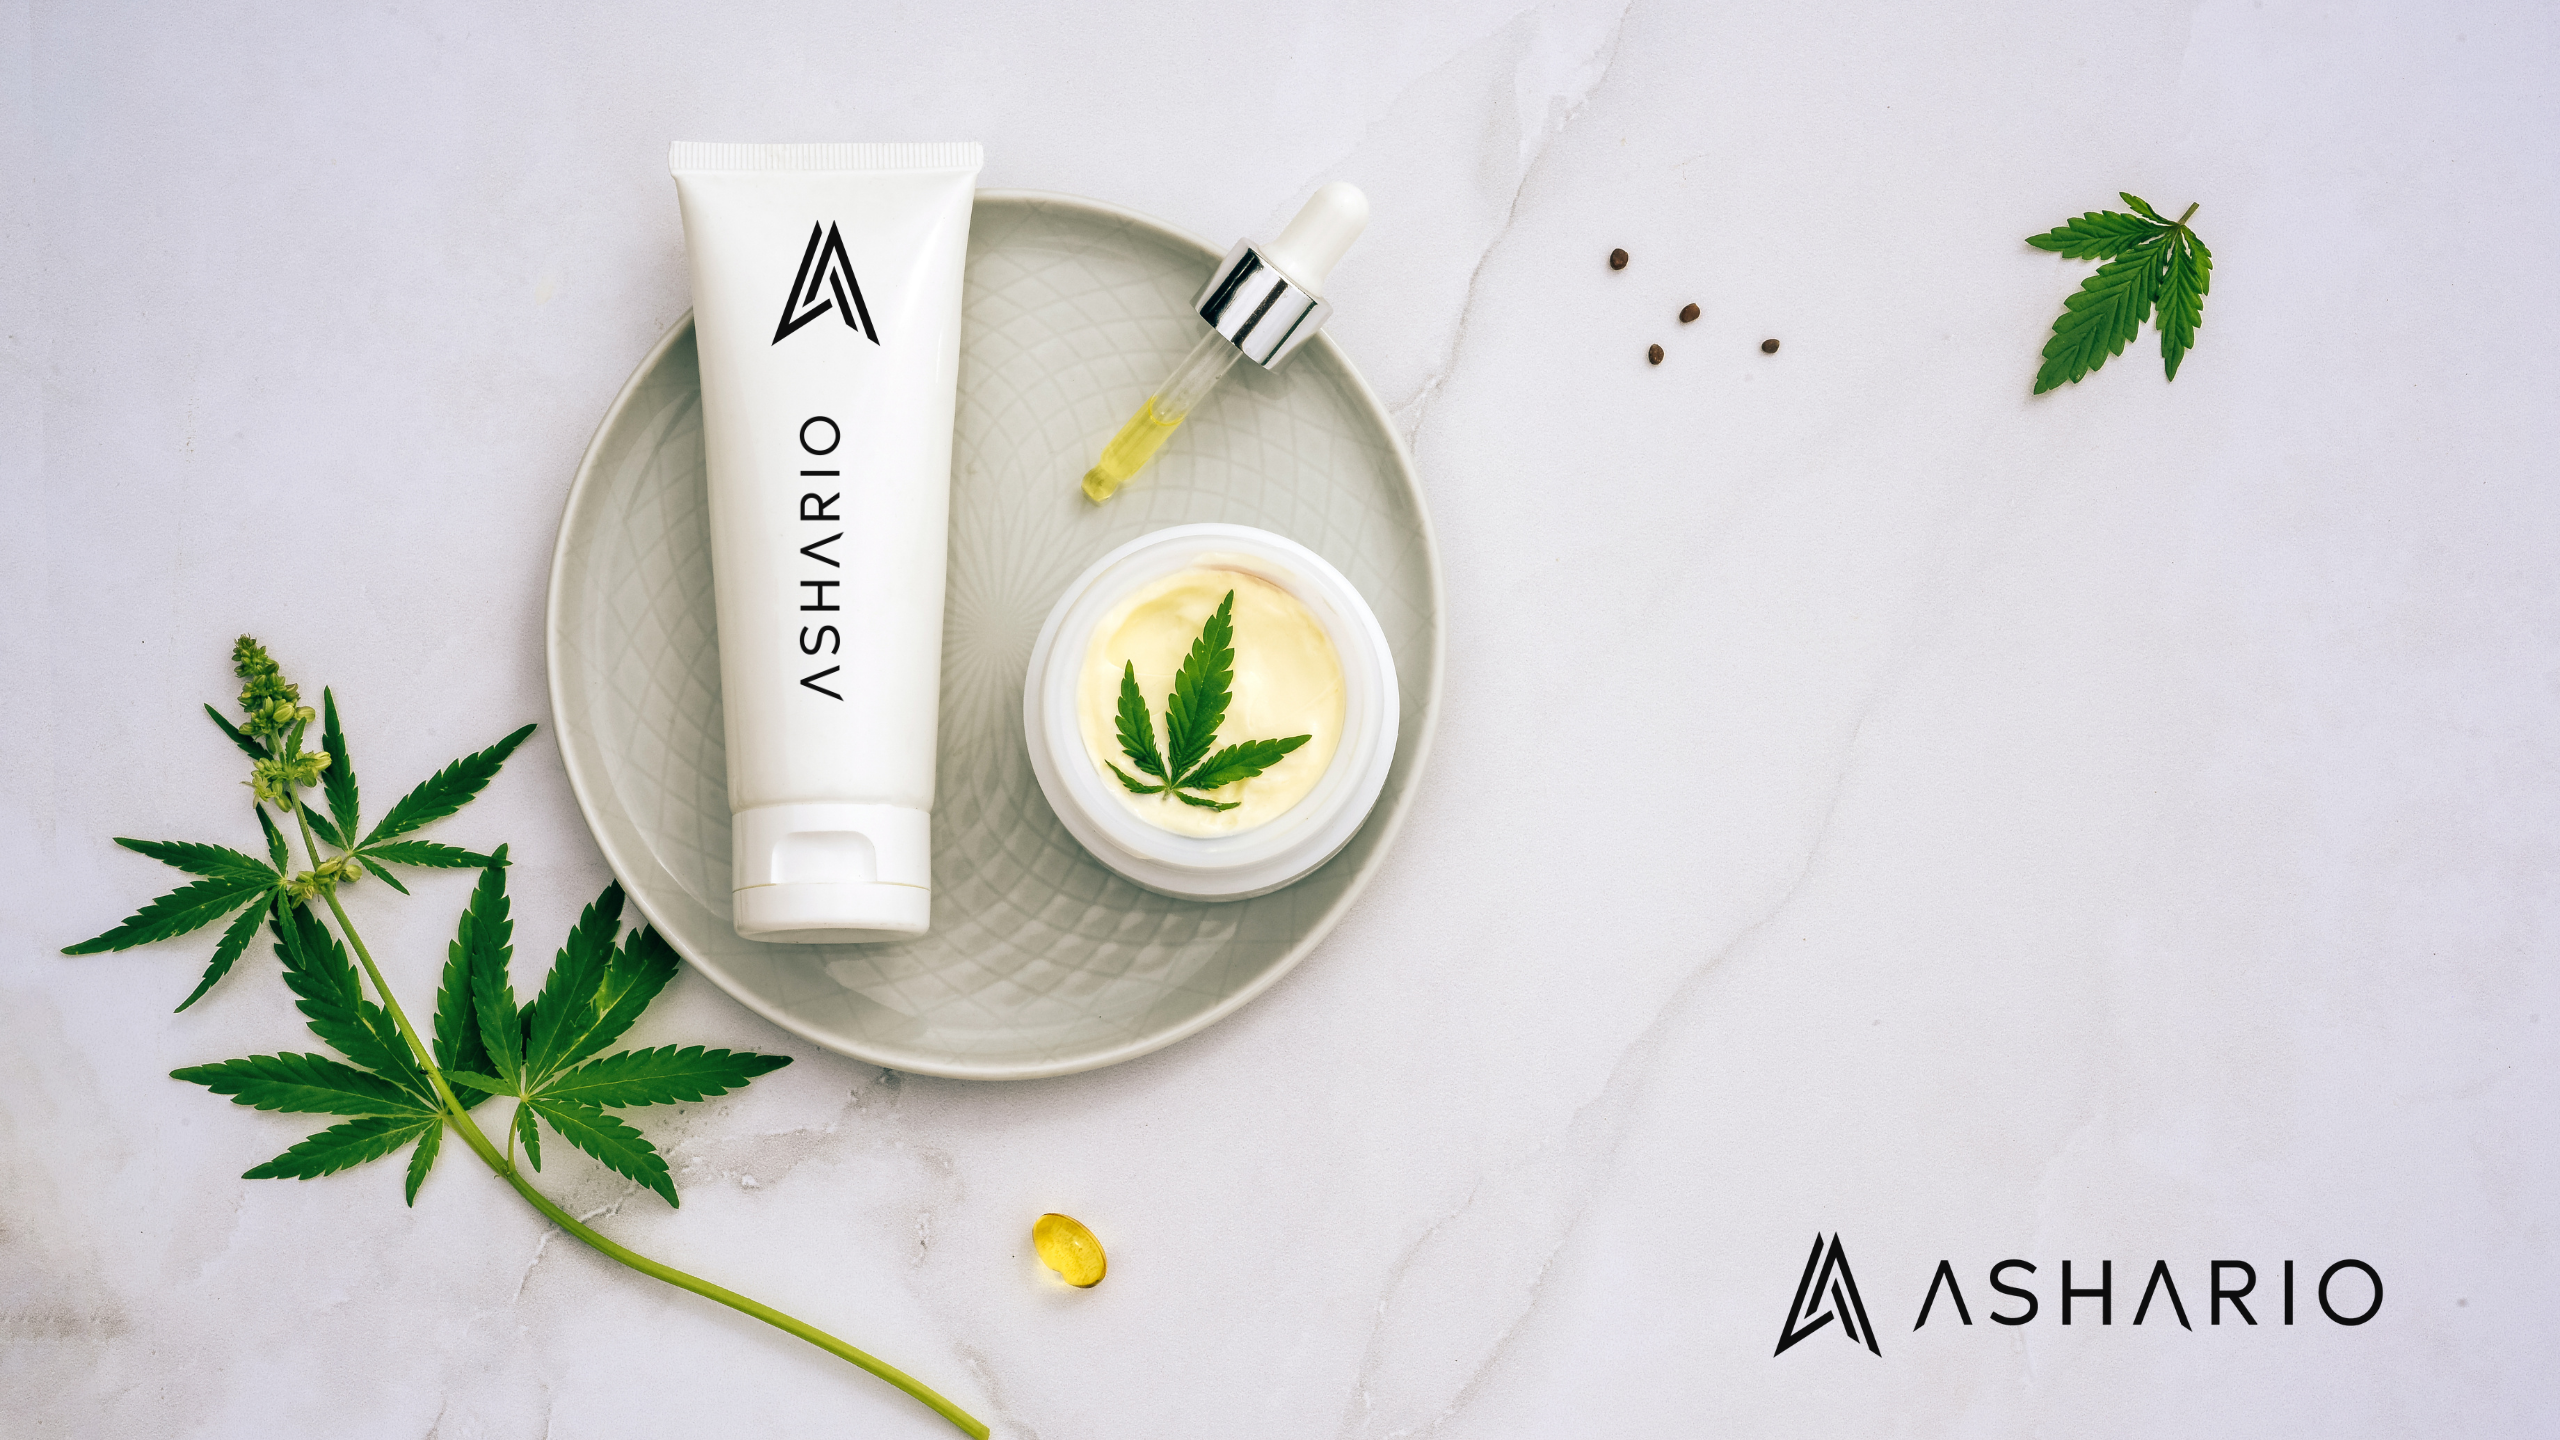 Elevate your wellness with premium CBD products from Ashario. Explore the benefits of broad spectrum CBD and pure CBD products online, designed to promote balance and enhance your daily routine.